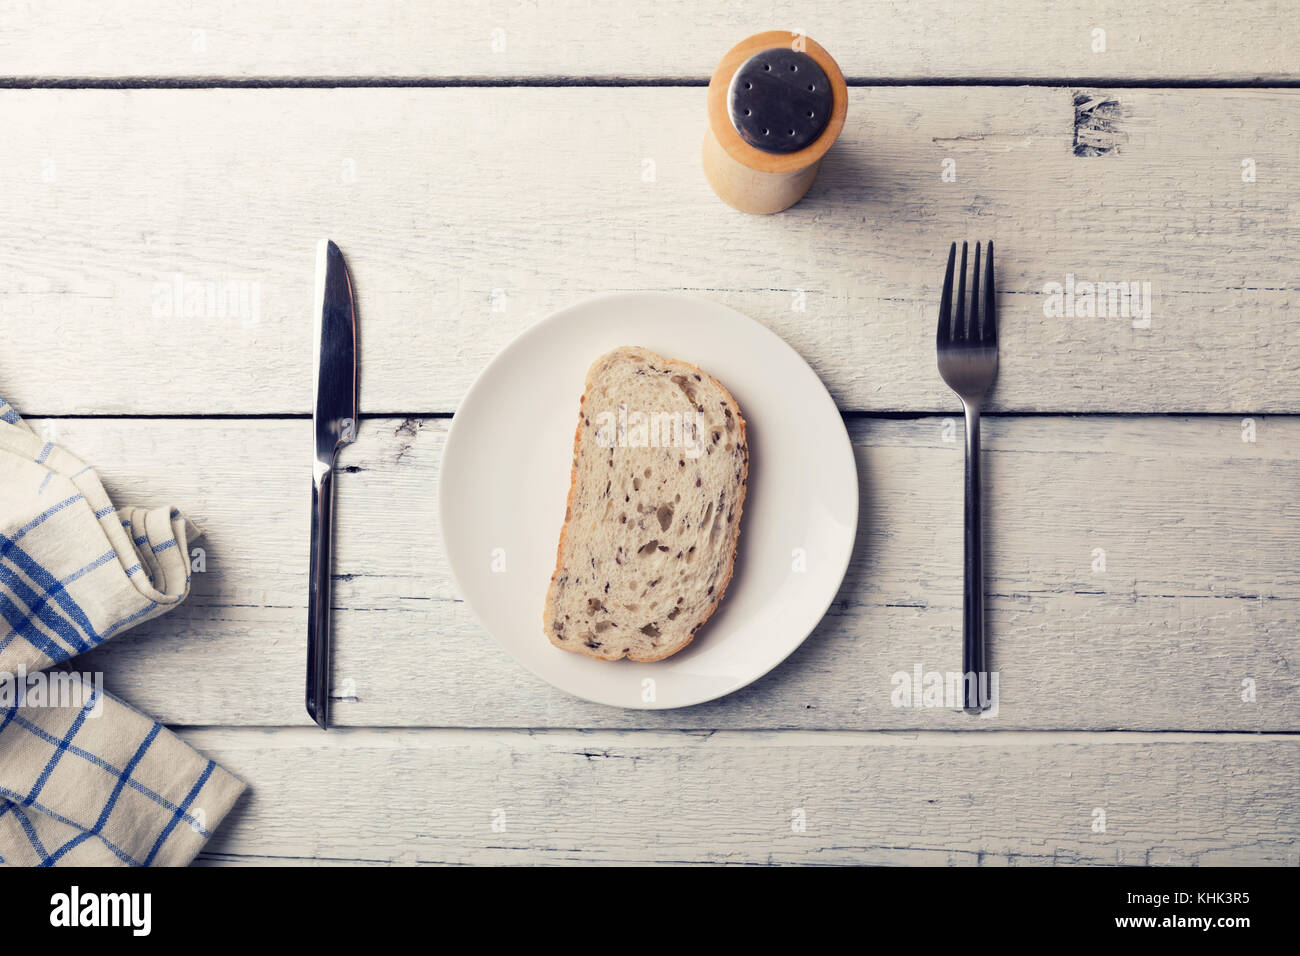 poor lunch - slice of bread on a plate and cutlery on wooden table Stock Photo